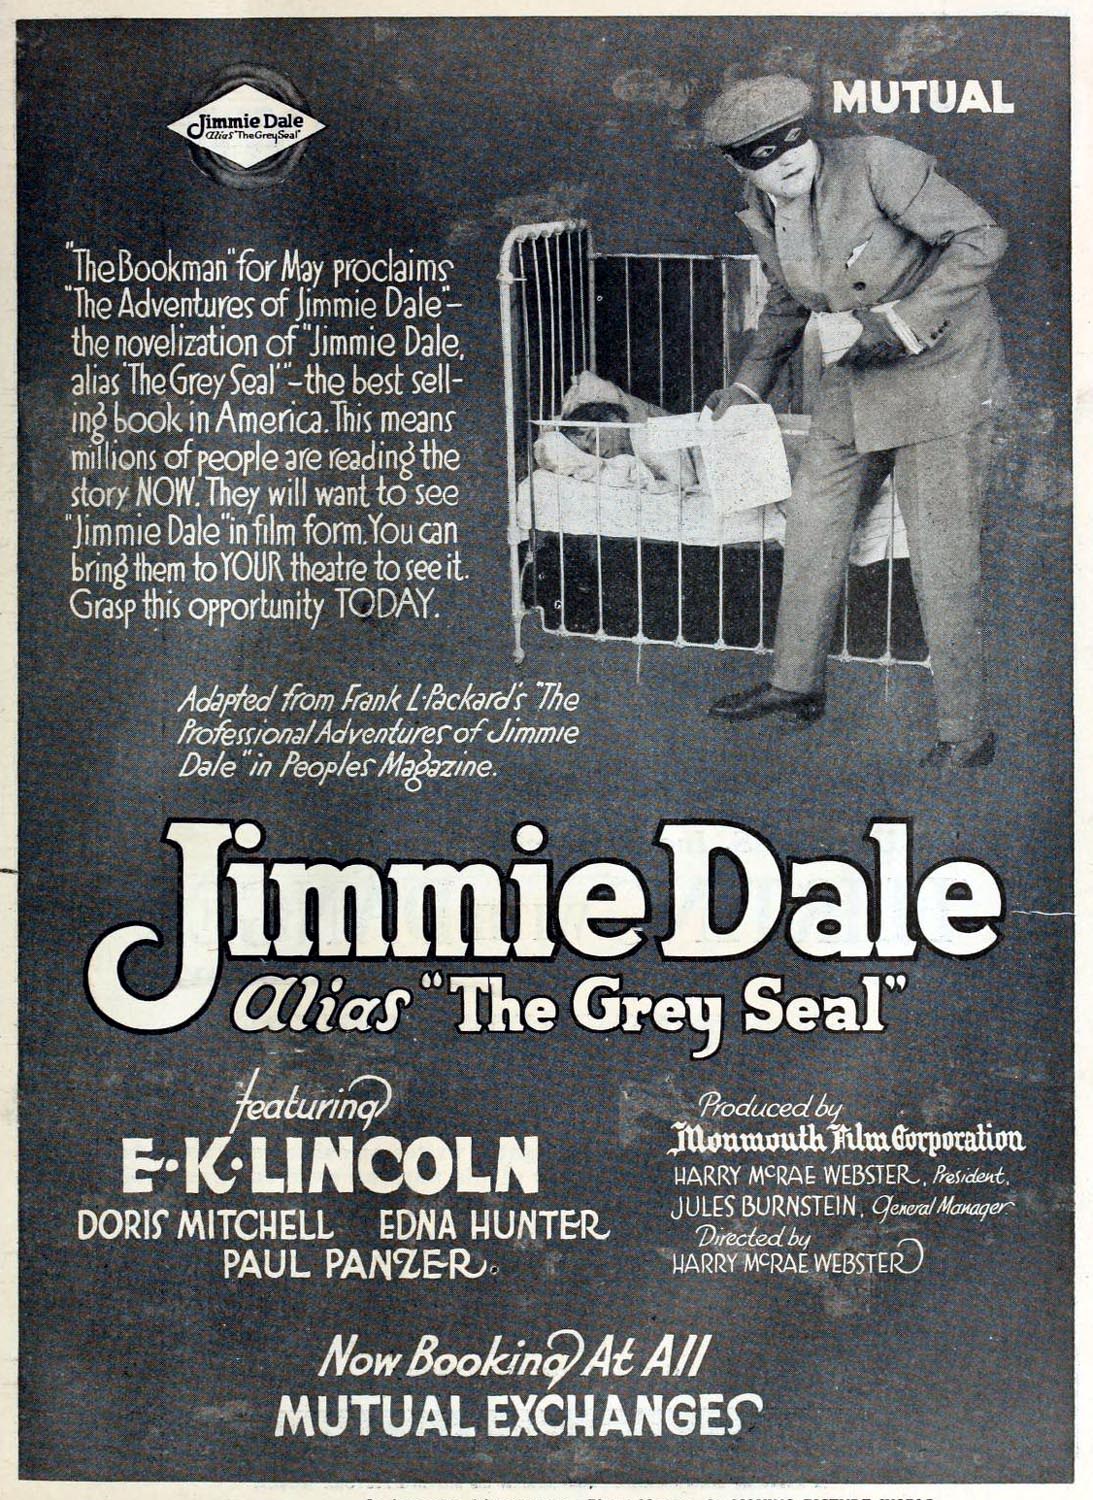 JIMMIE DALE, ALIAS THE GREY SEAL